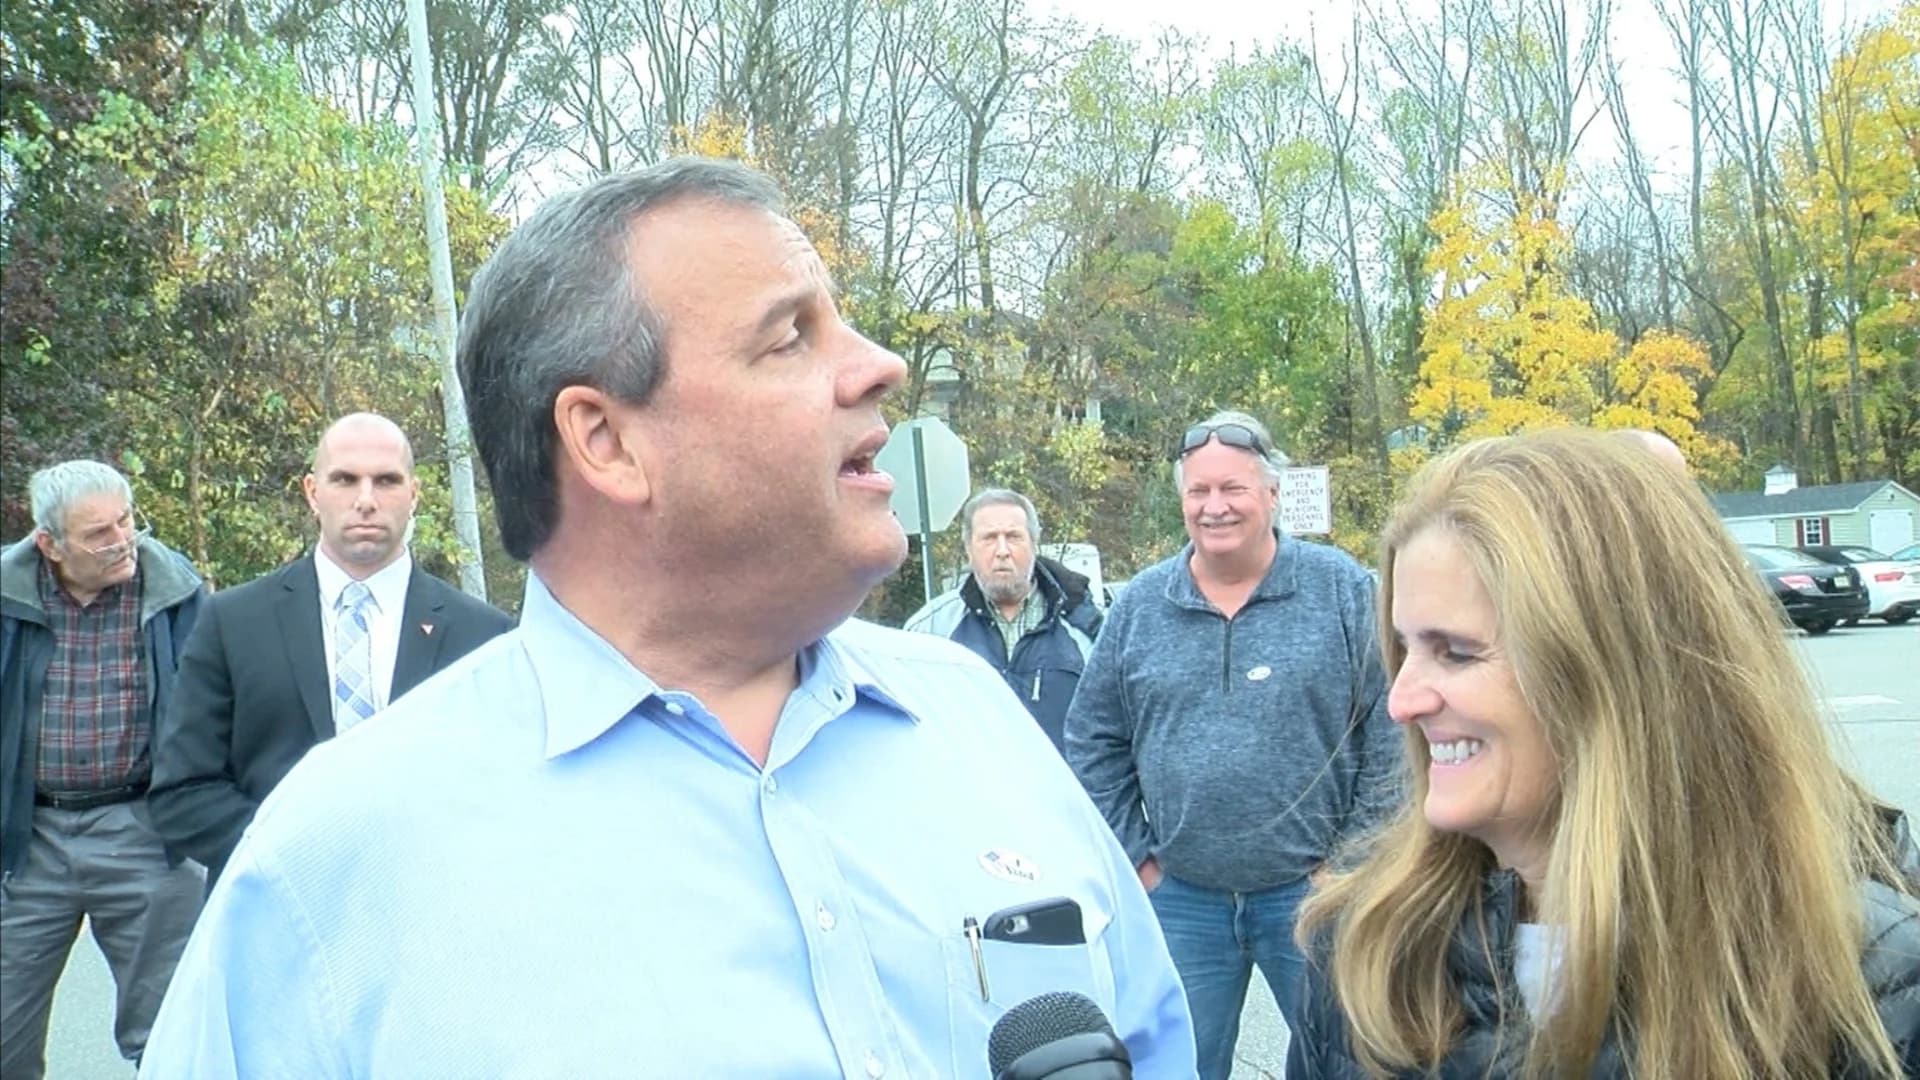 Christie gets into it with voter, calls it 'joy' of service